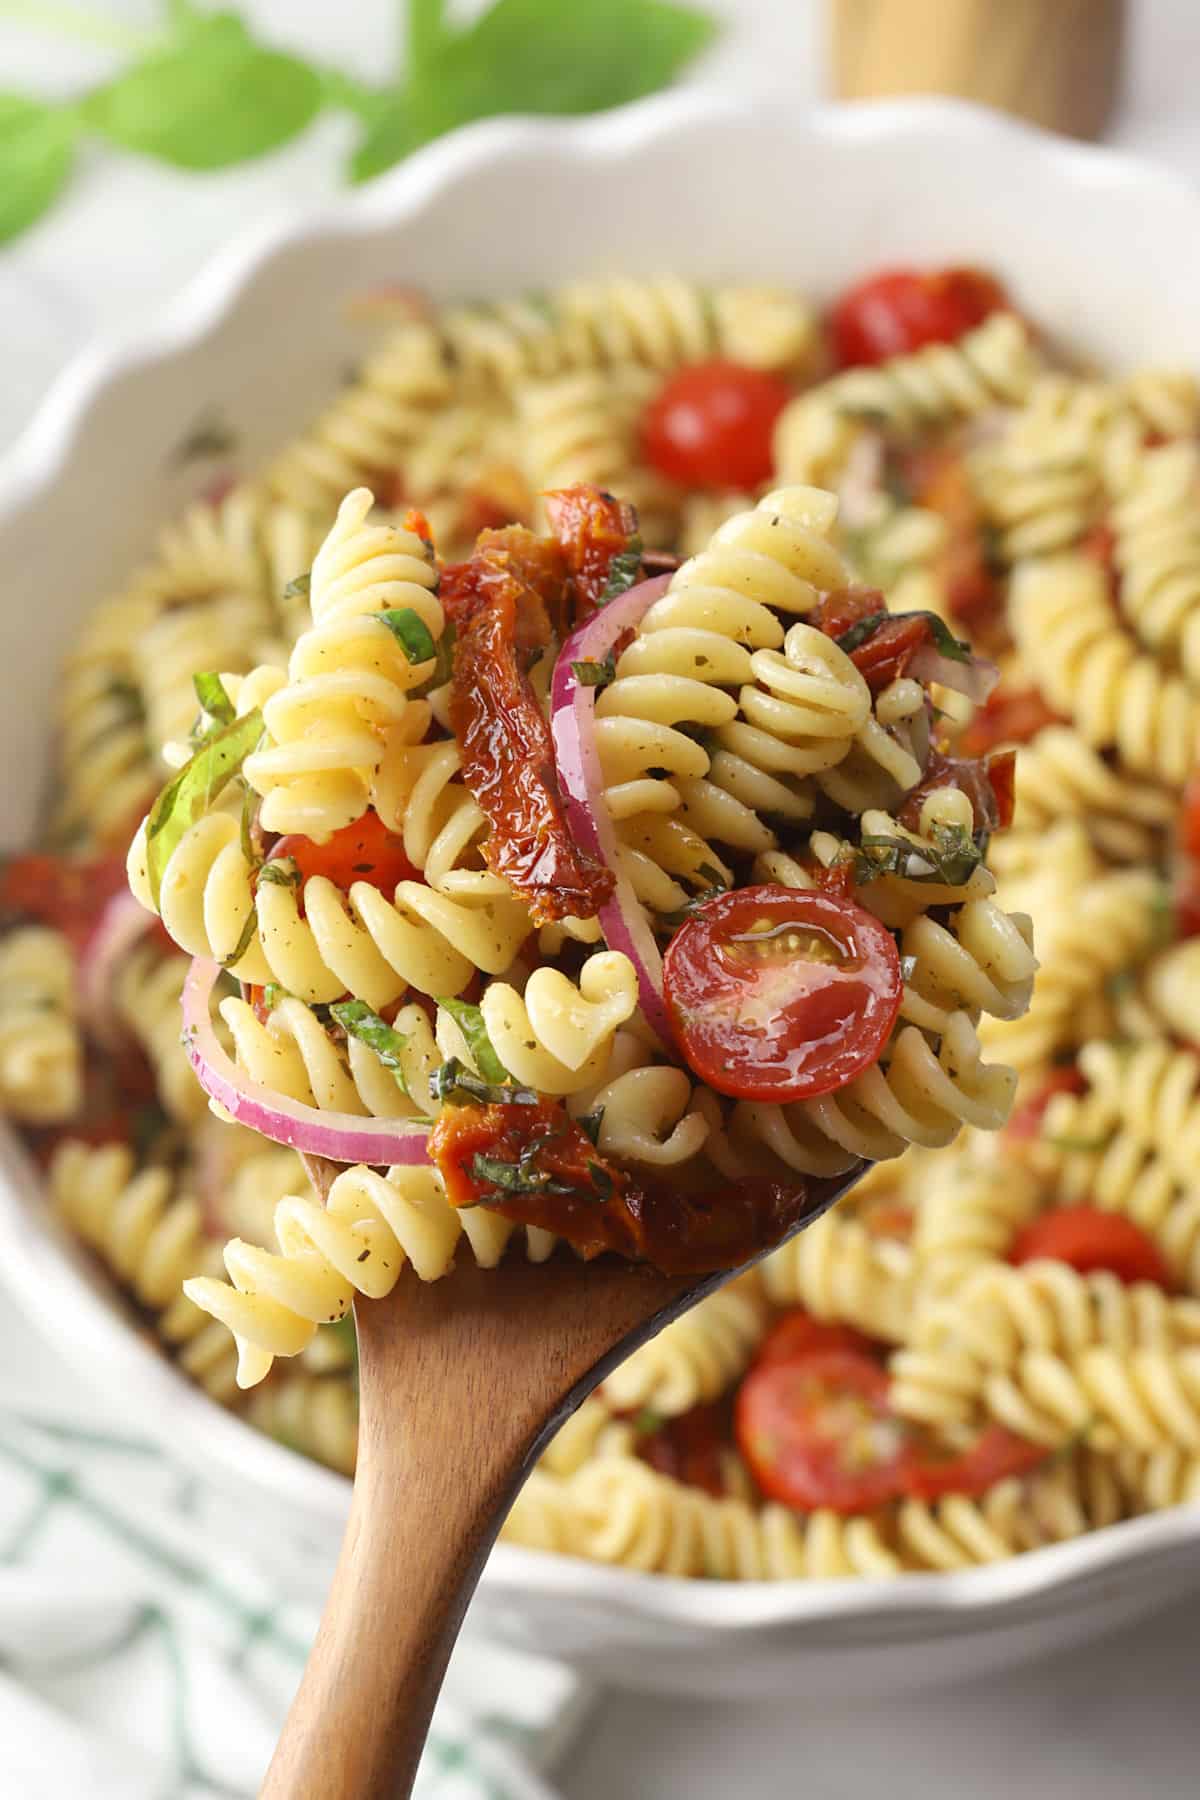 A wooden serving spoon filled with sun-dried tomato pasta salad.